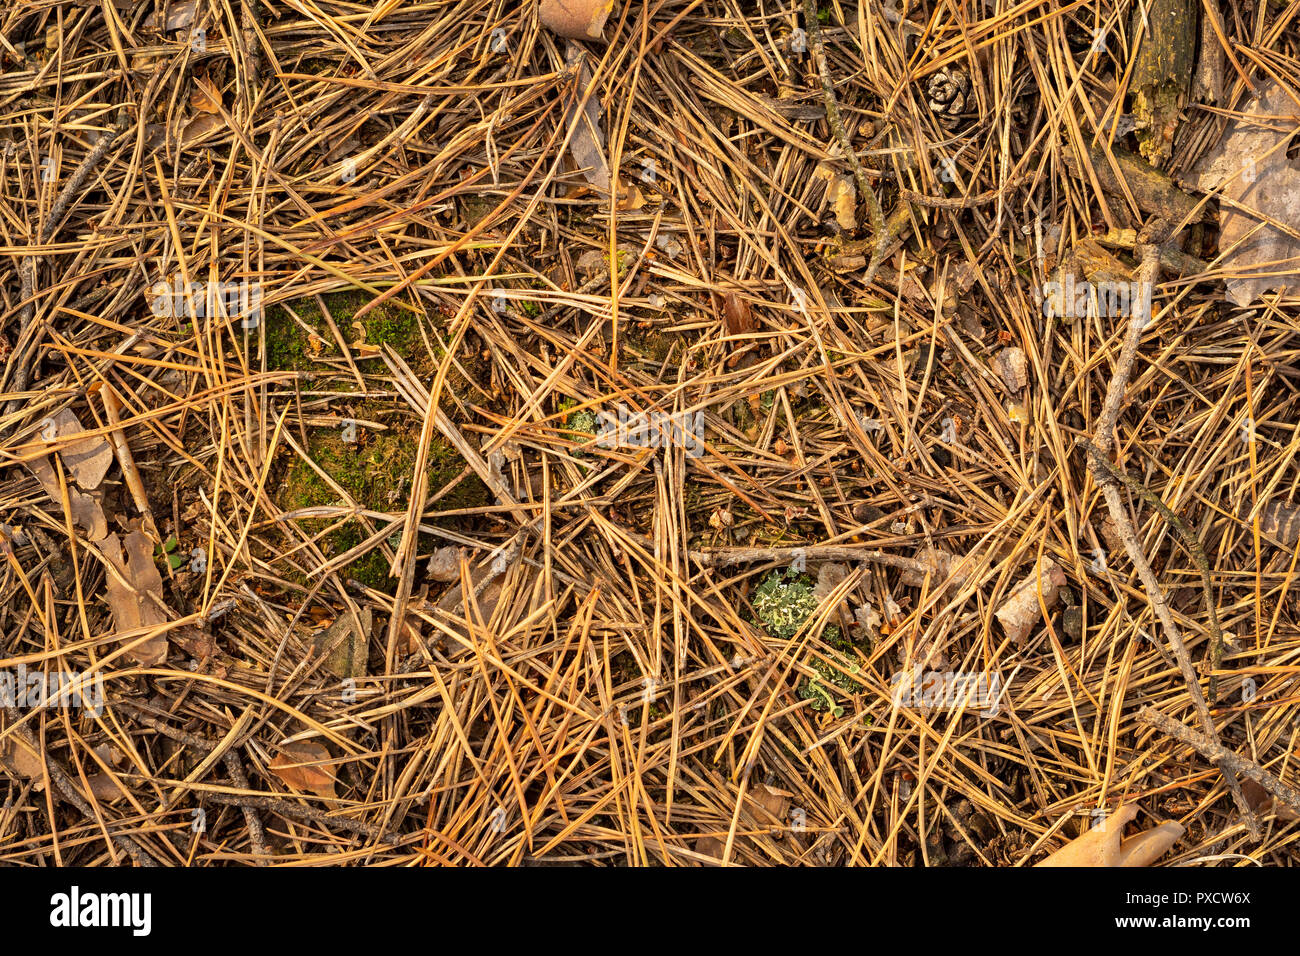 Fallen cones and spruce needles in the fall lie on the grass and moss close up. Copy space background. Stock Photo